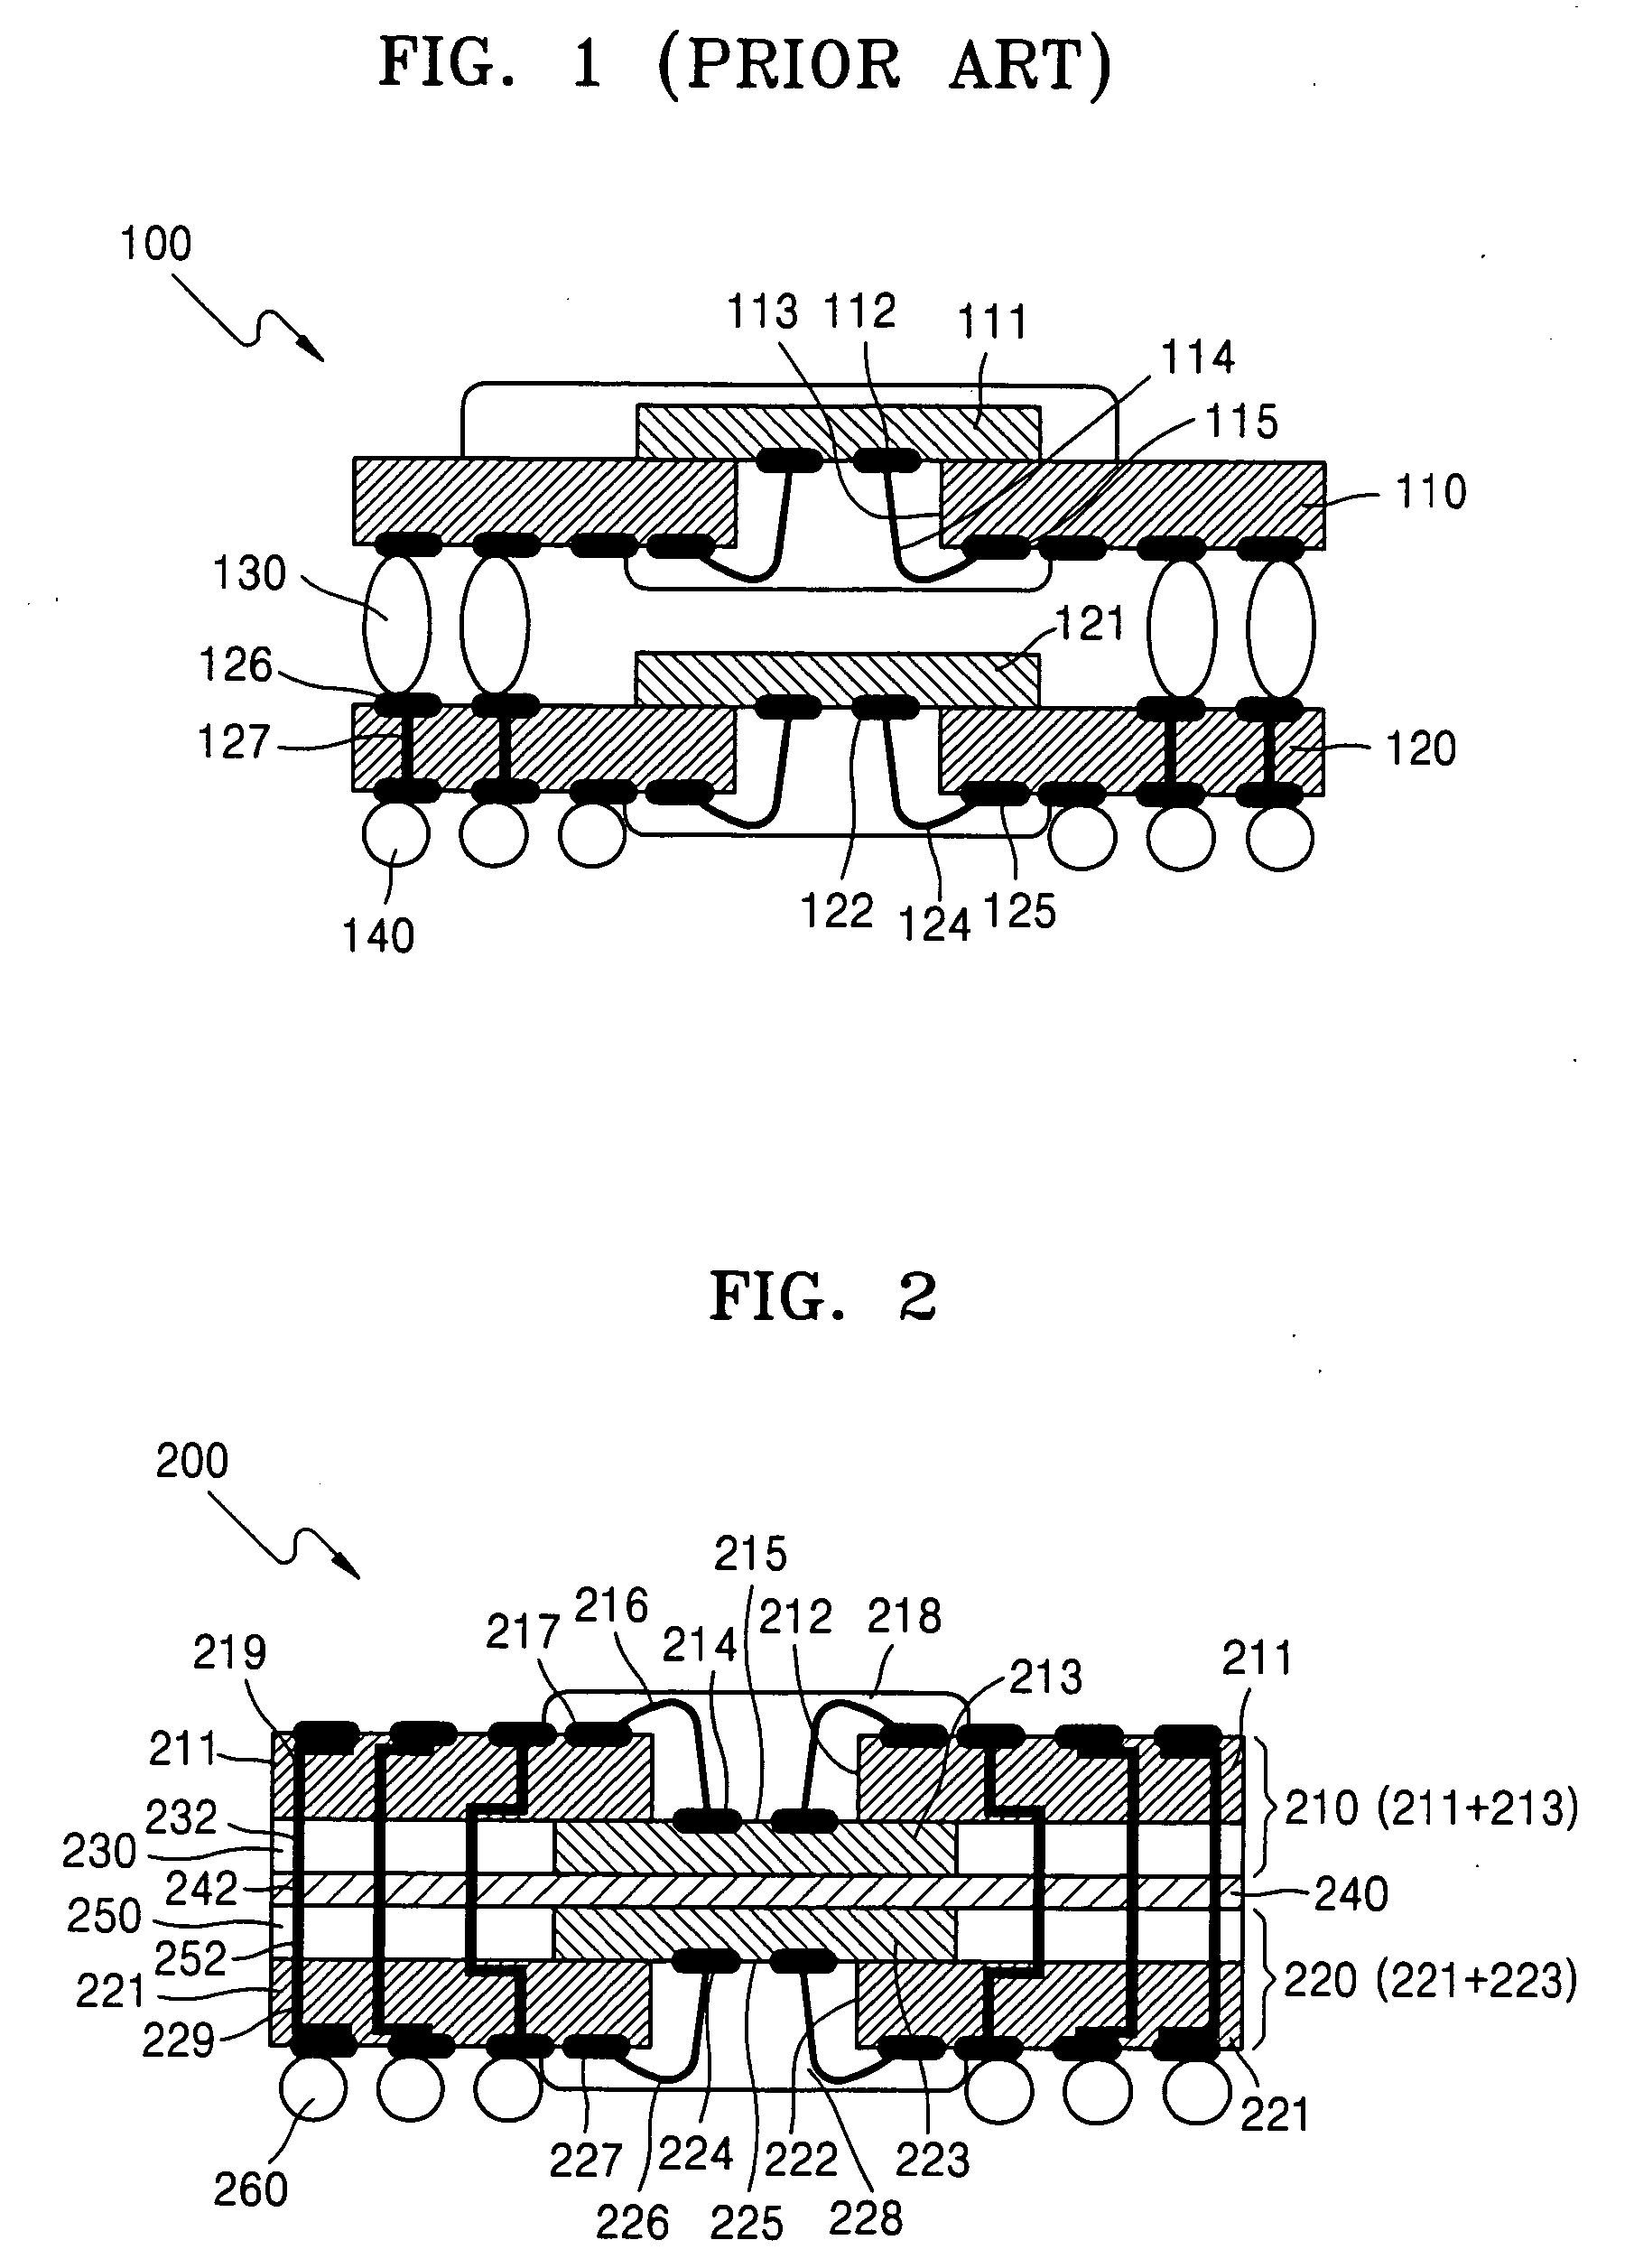 Stacked board-on-chip package having mirroring structure and dual inline memory module on which the stacked board-on-chip package are mounted